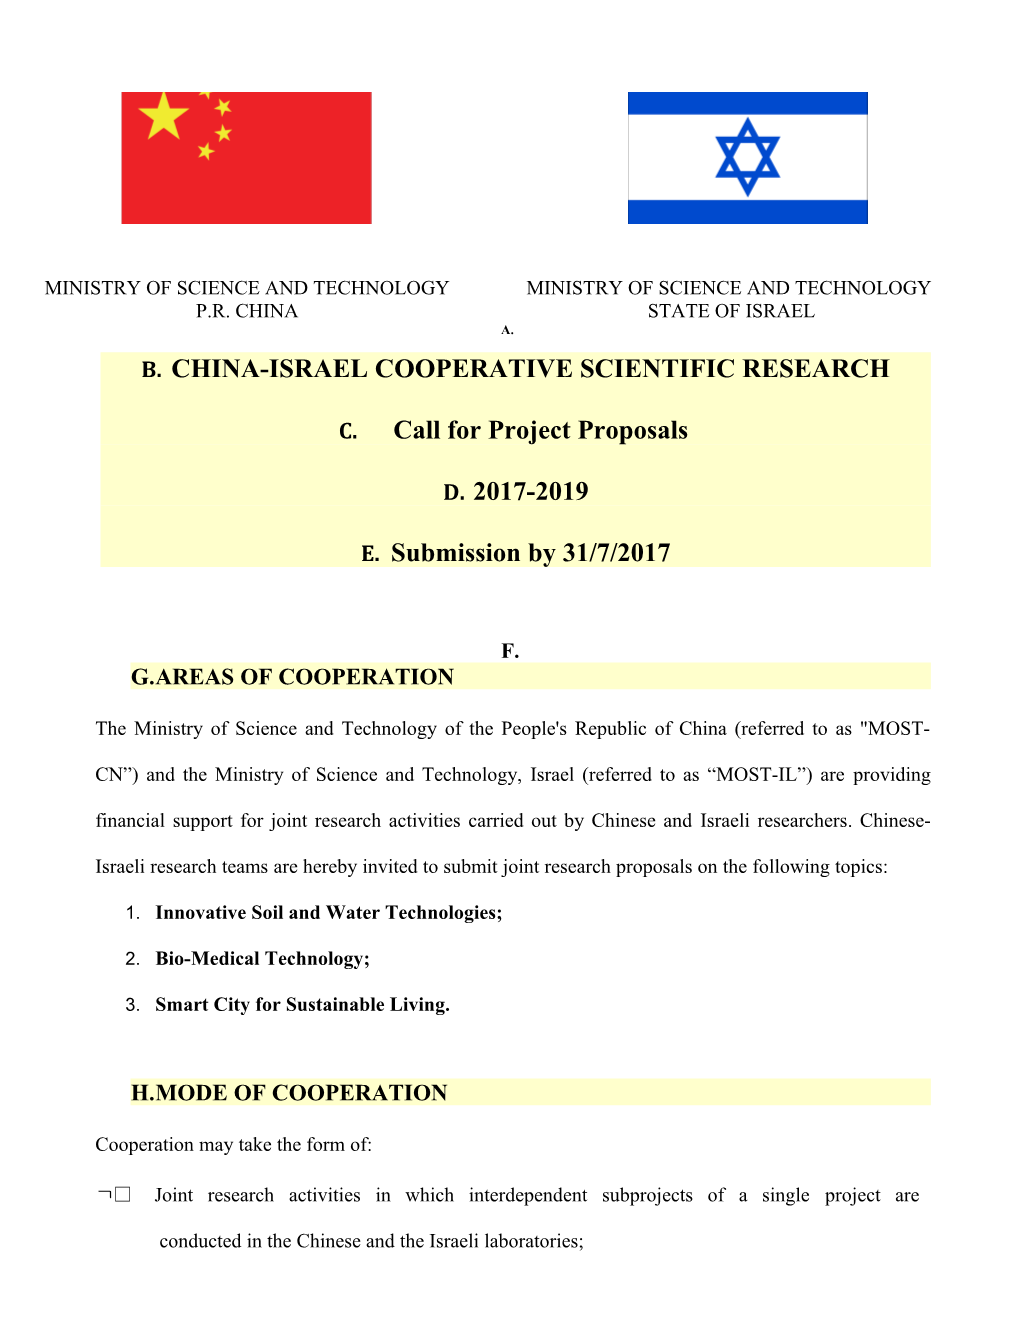 Call for Proposals-China-Israel 2017